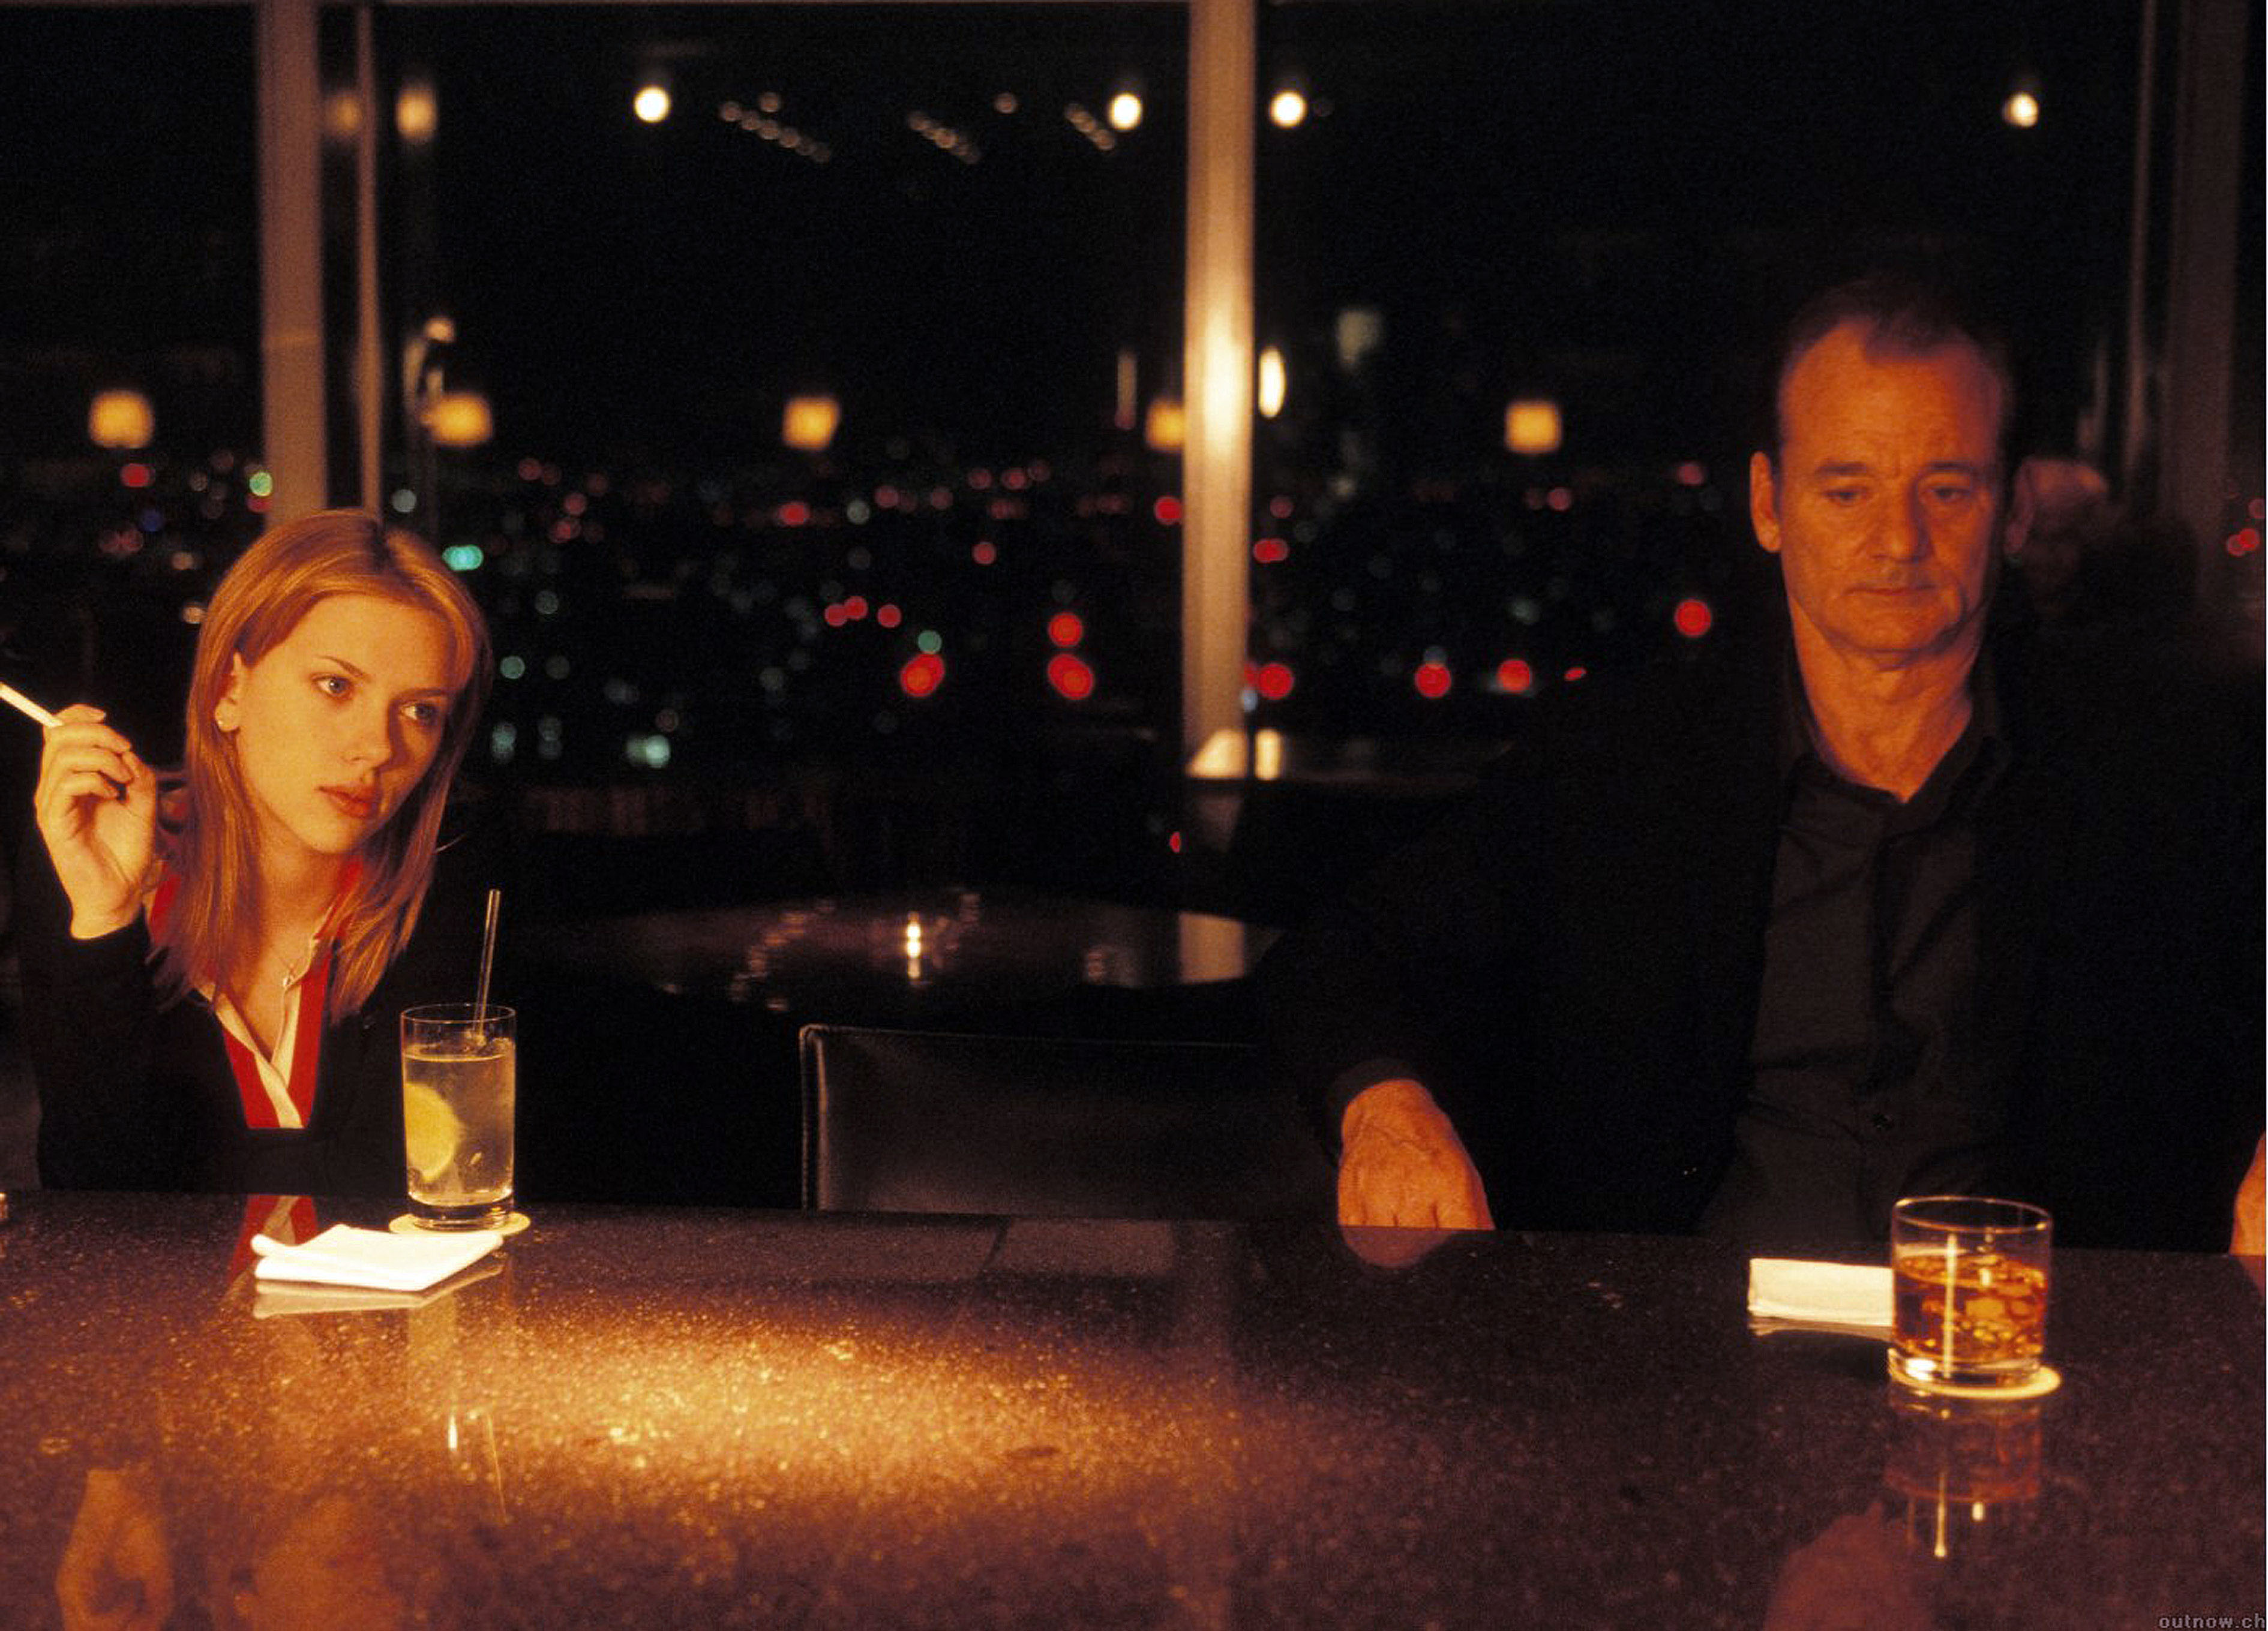 (From left) Scarlett Johansson as Charlotte and Bill Murray as Bob Harris at the Lost in Translation bar.